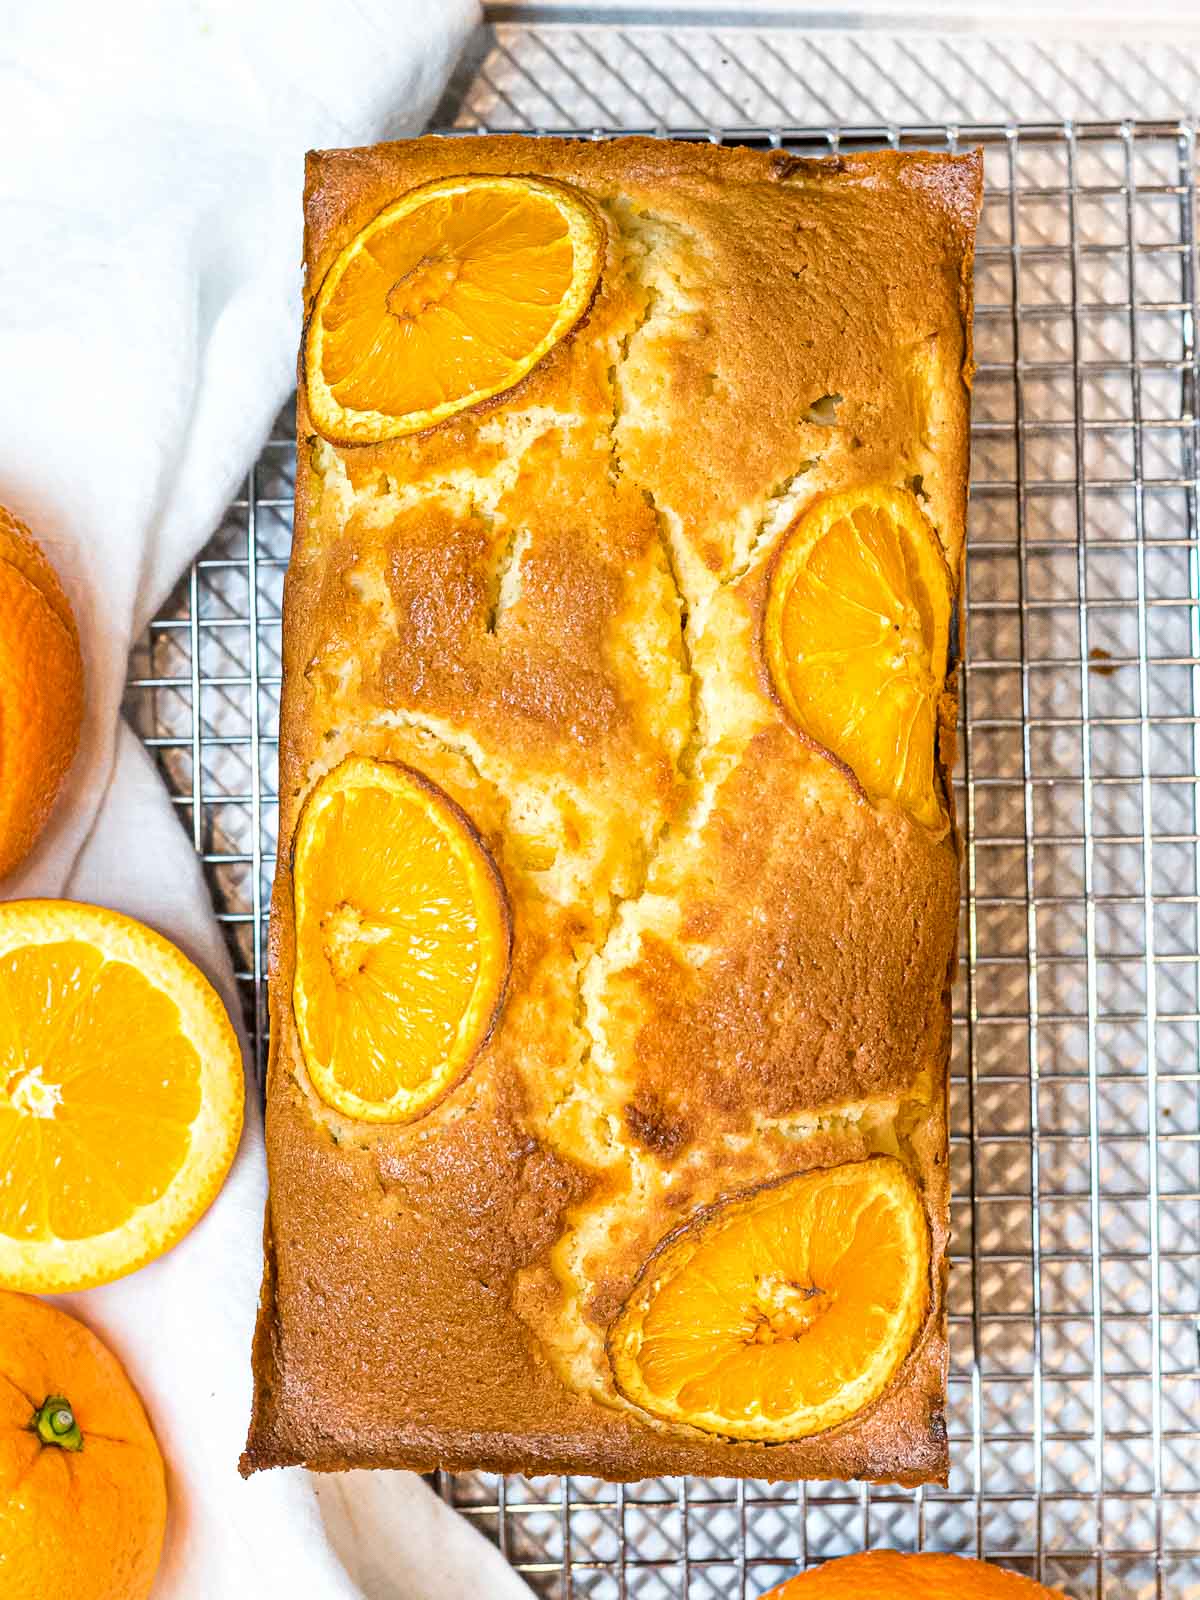 orange pound cake with a golden brown crust and decorated with orange slices placed on a wire rack next to oranges